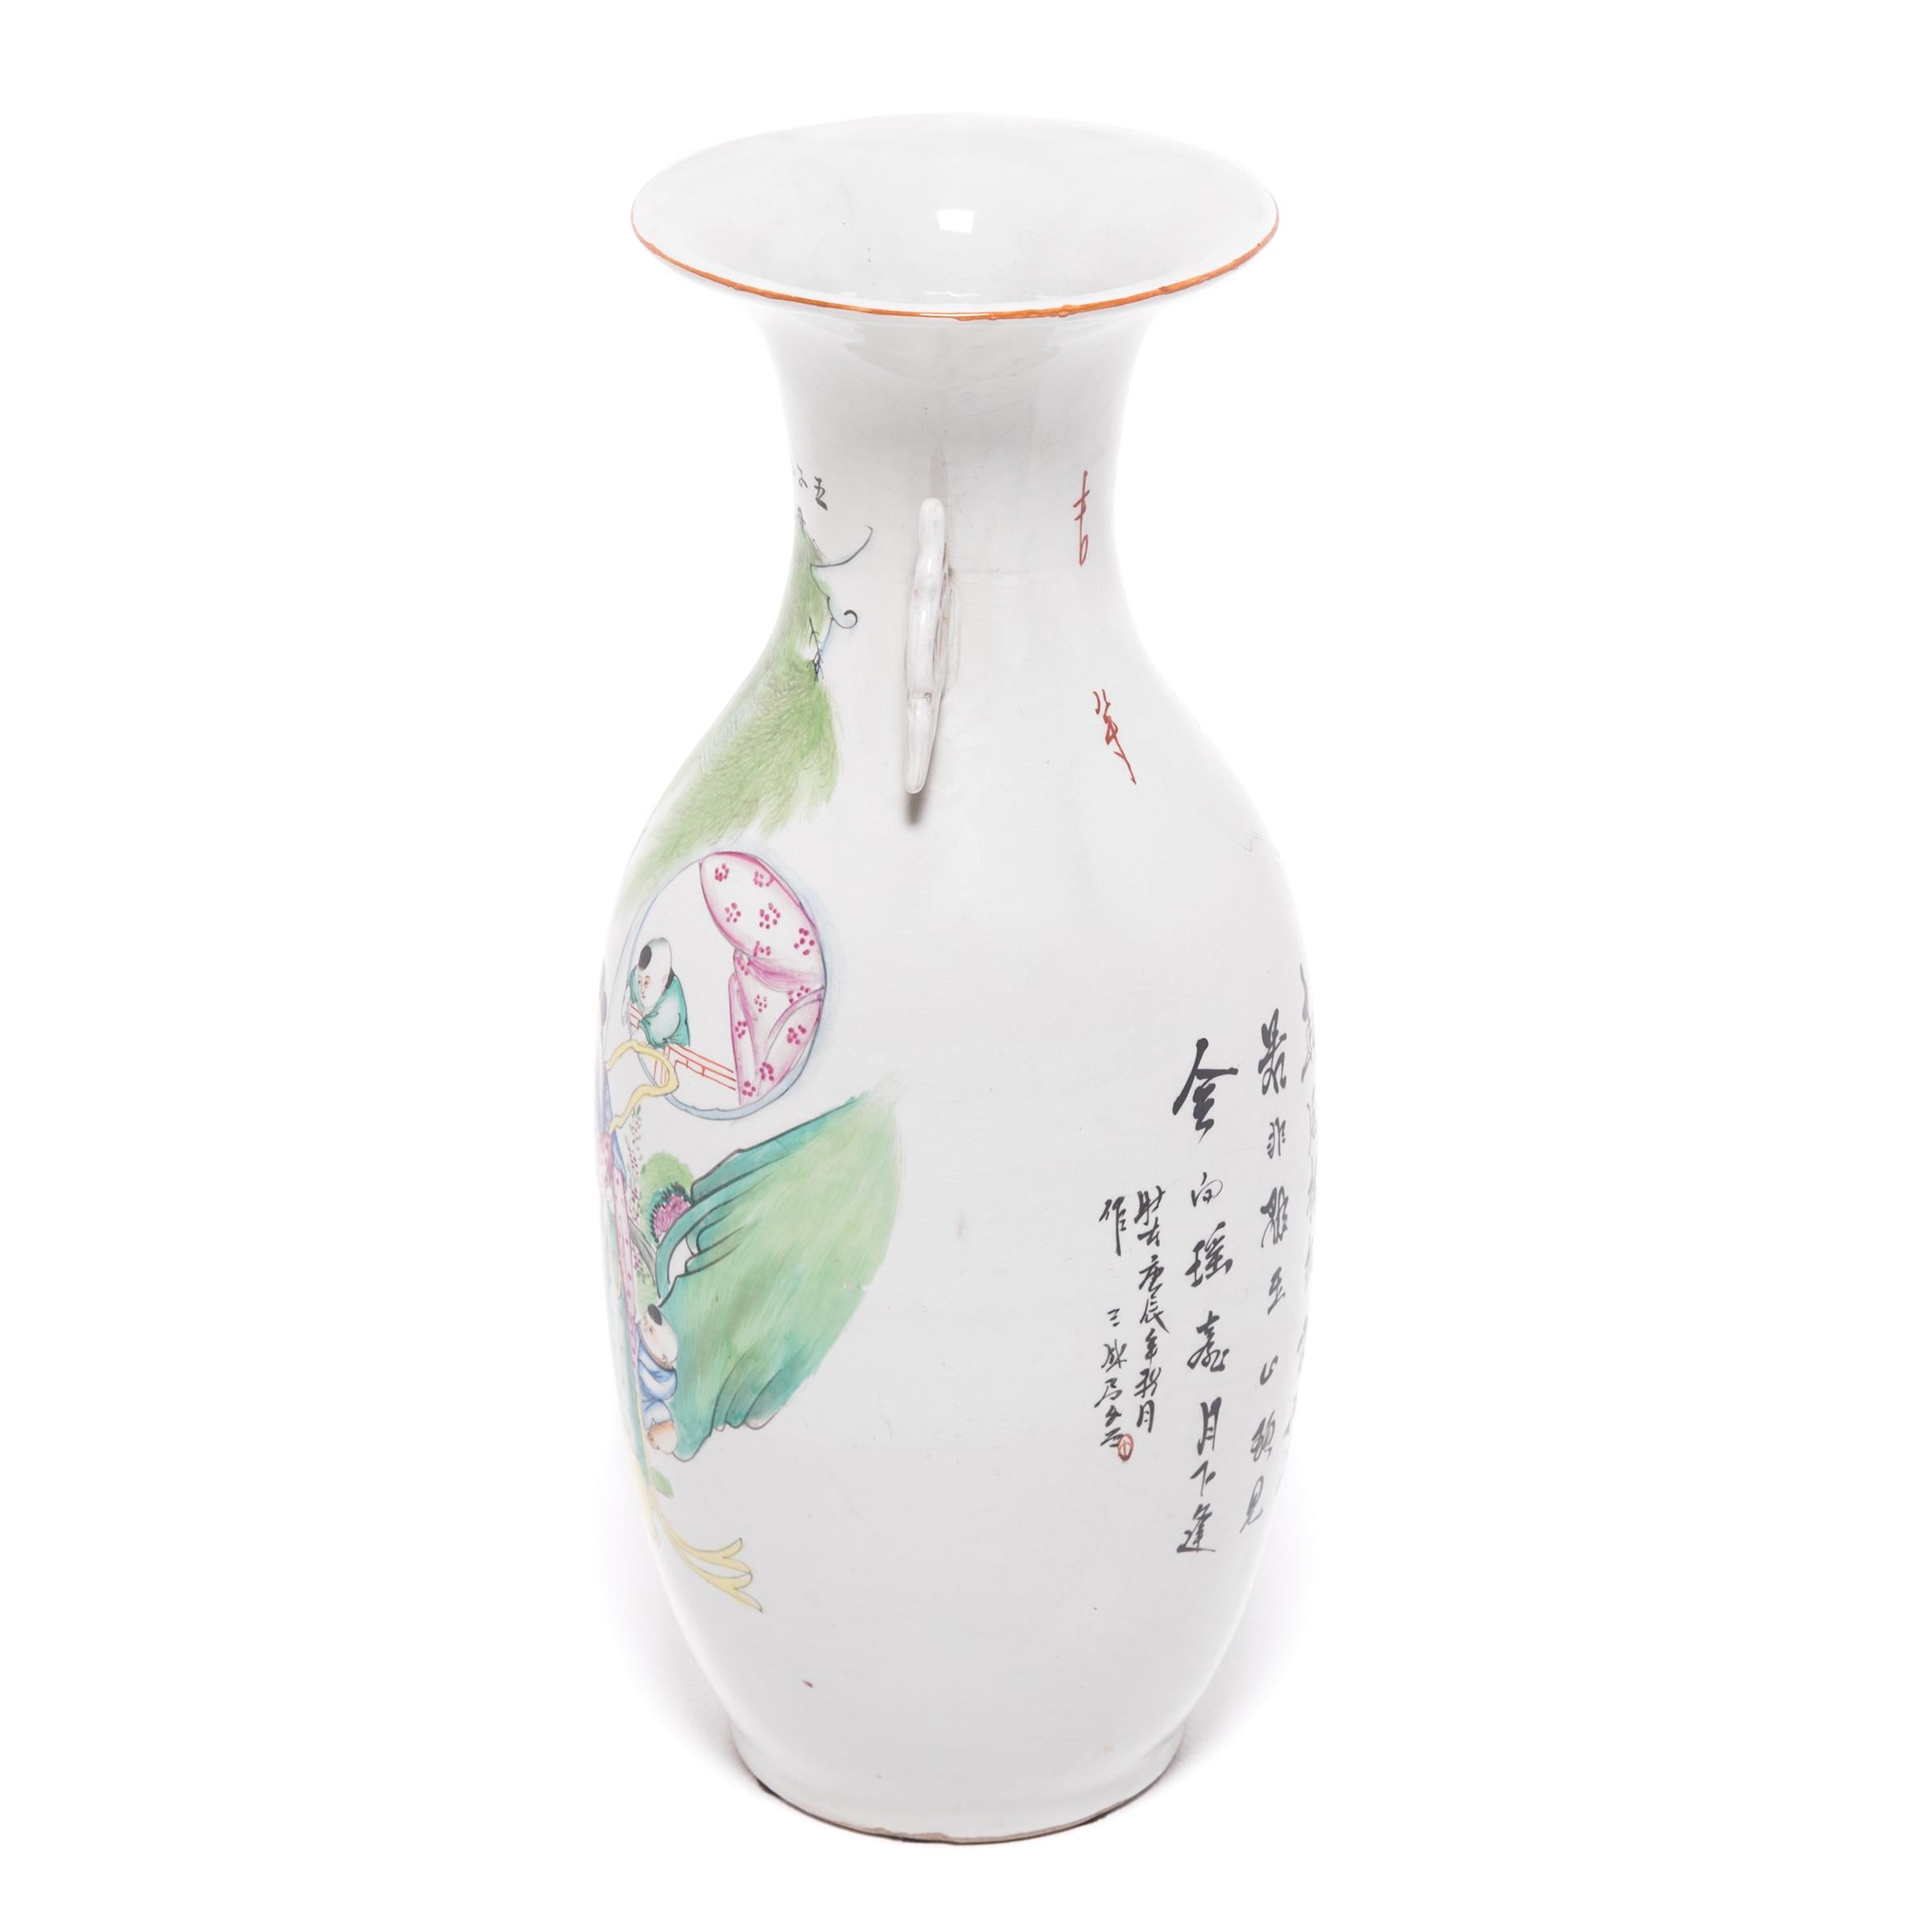 The form of this 19th century porcelain vase is called 